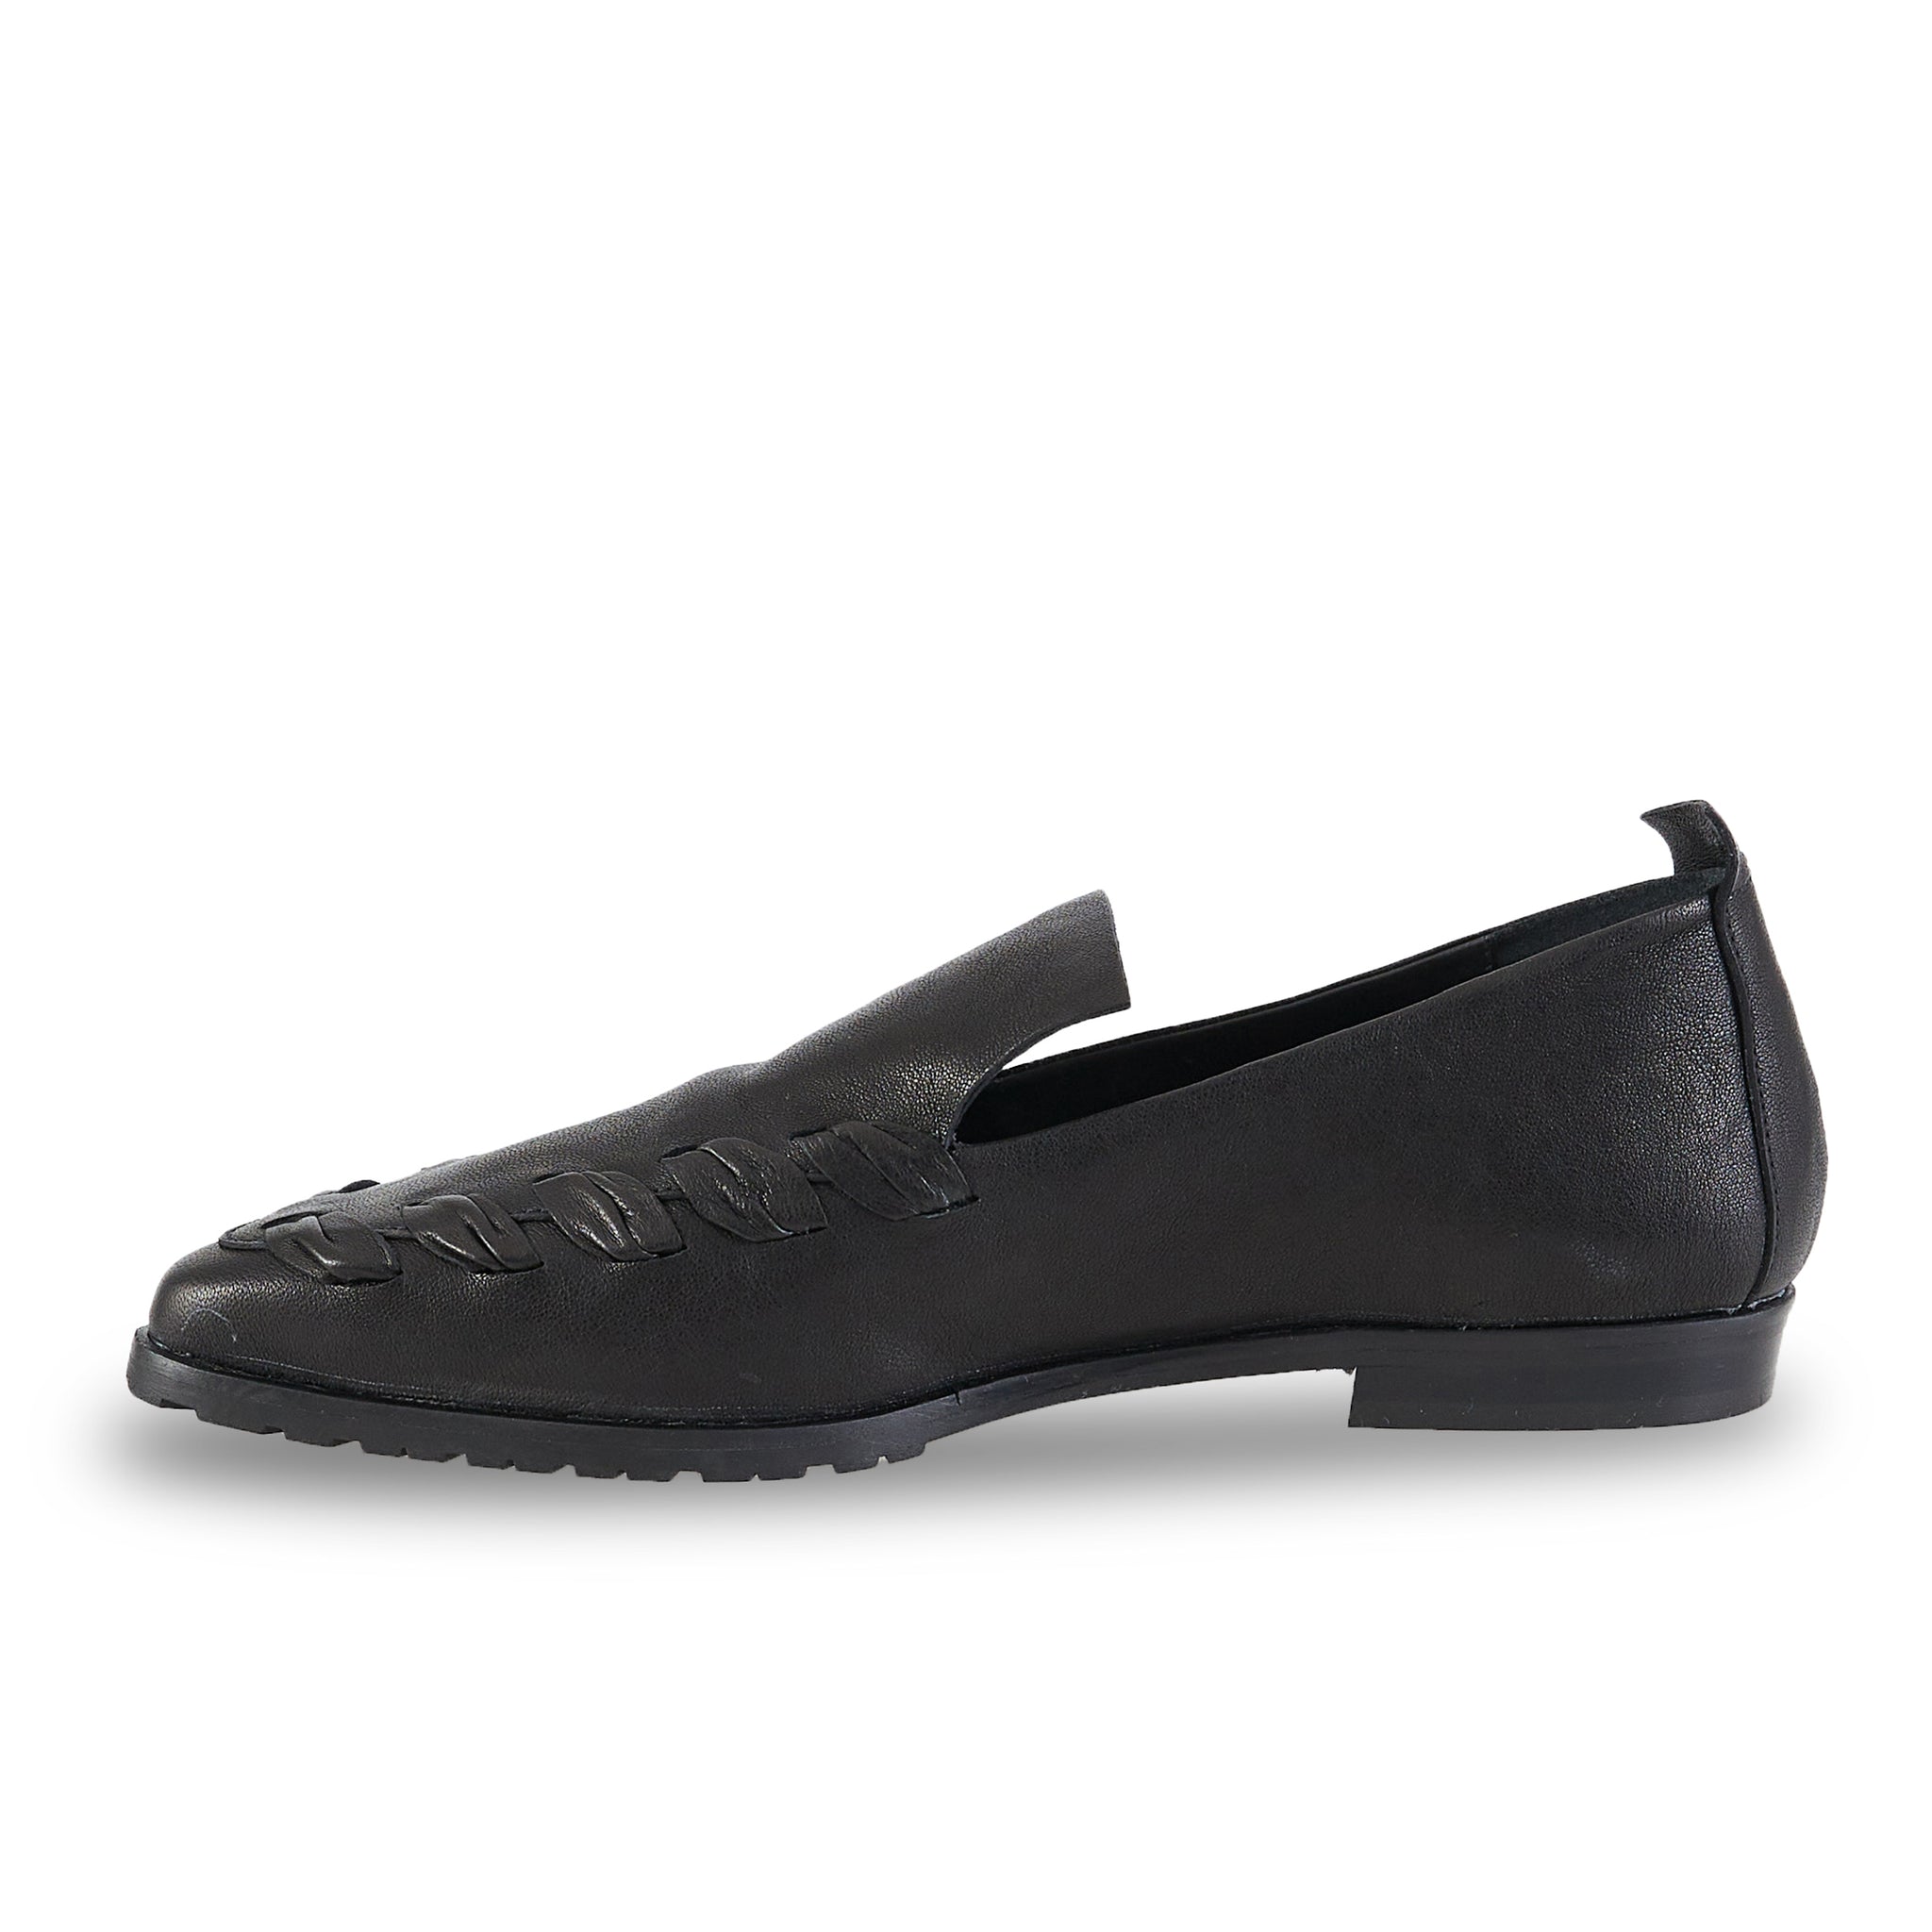 HENRY BEGUELIN Old Iron Ricamo Leather Loafer in Nero